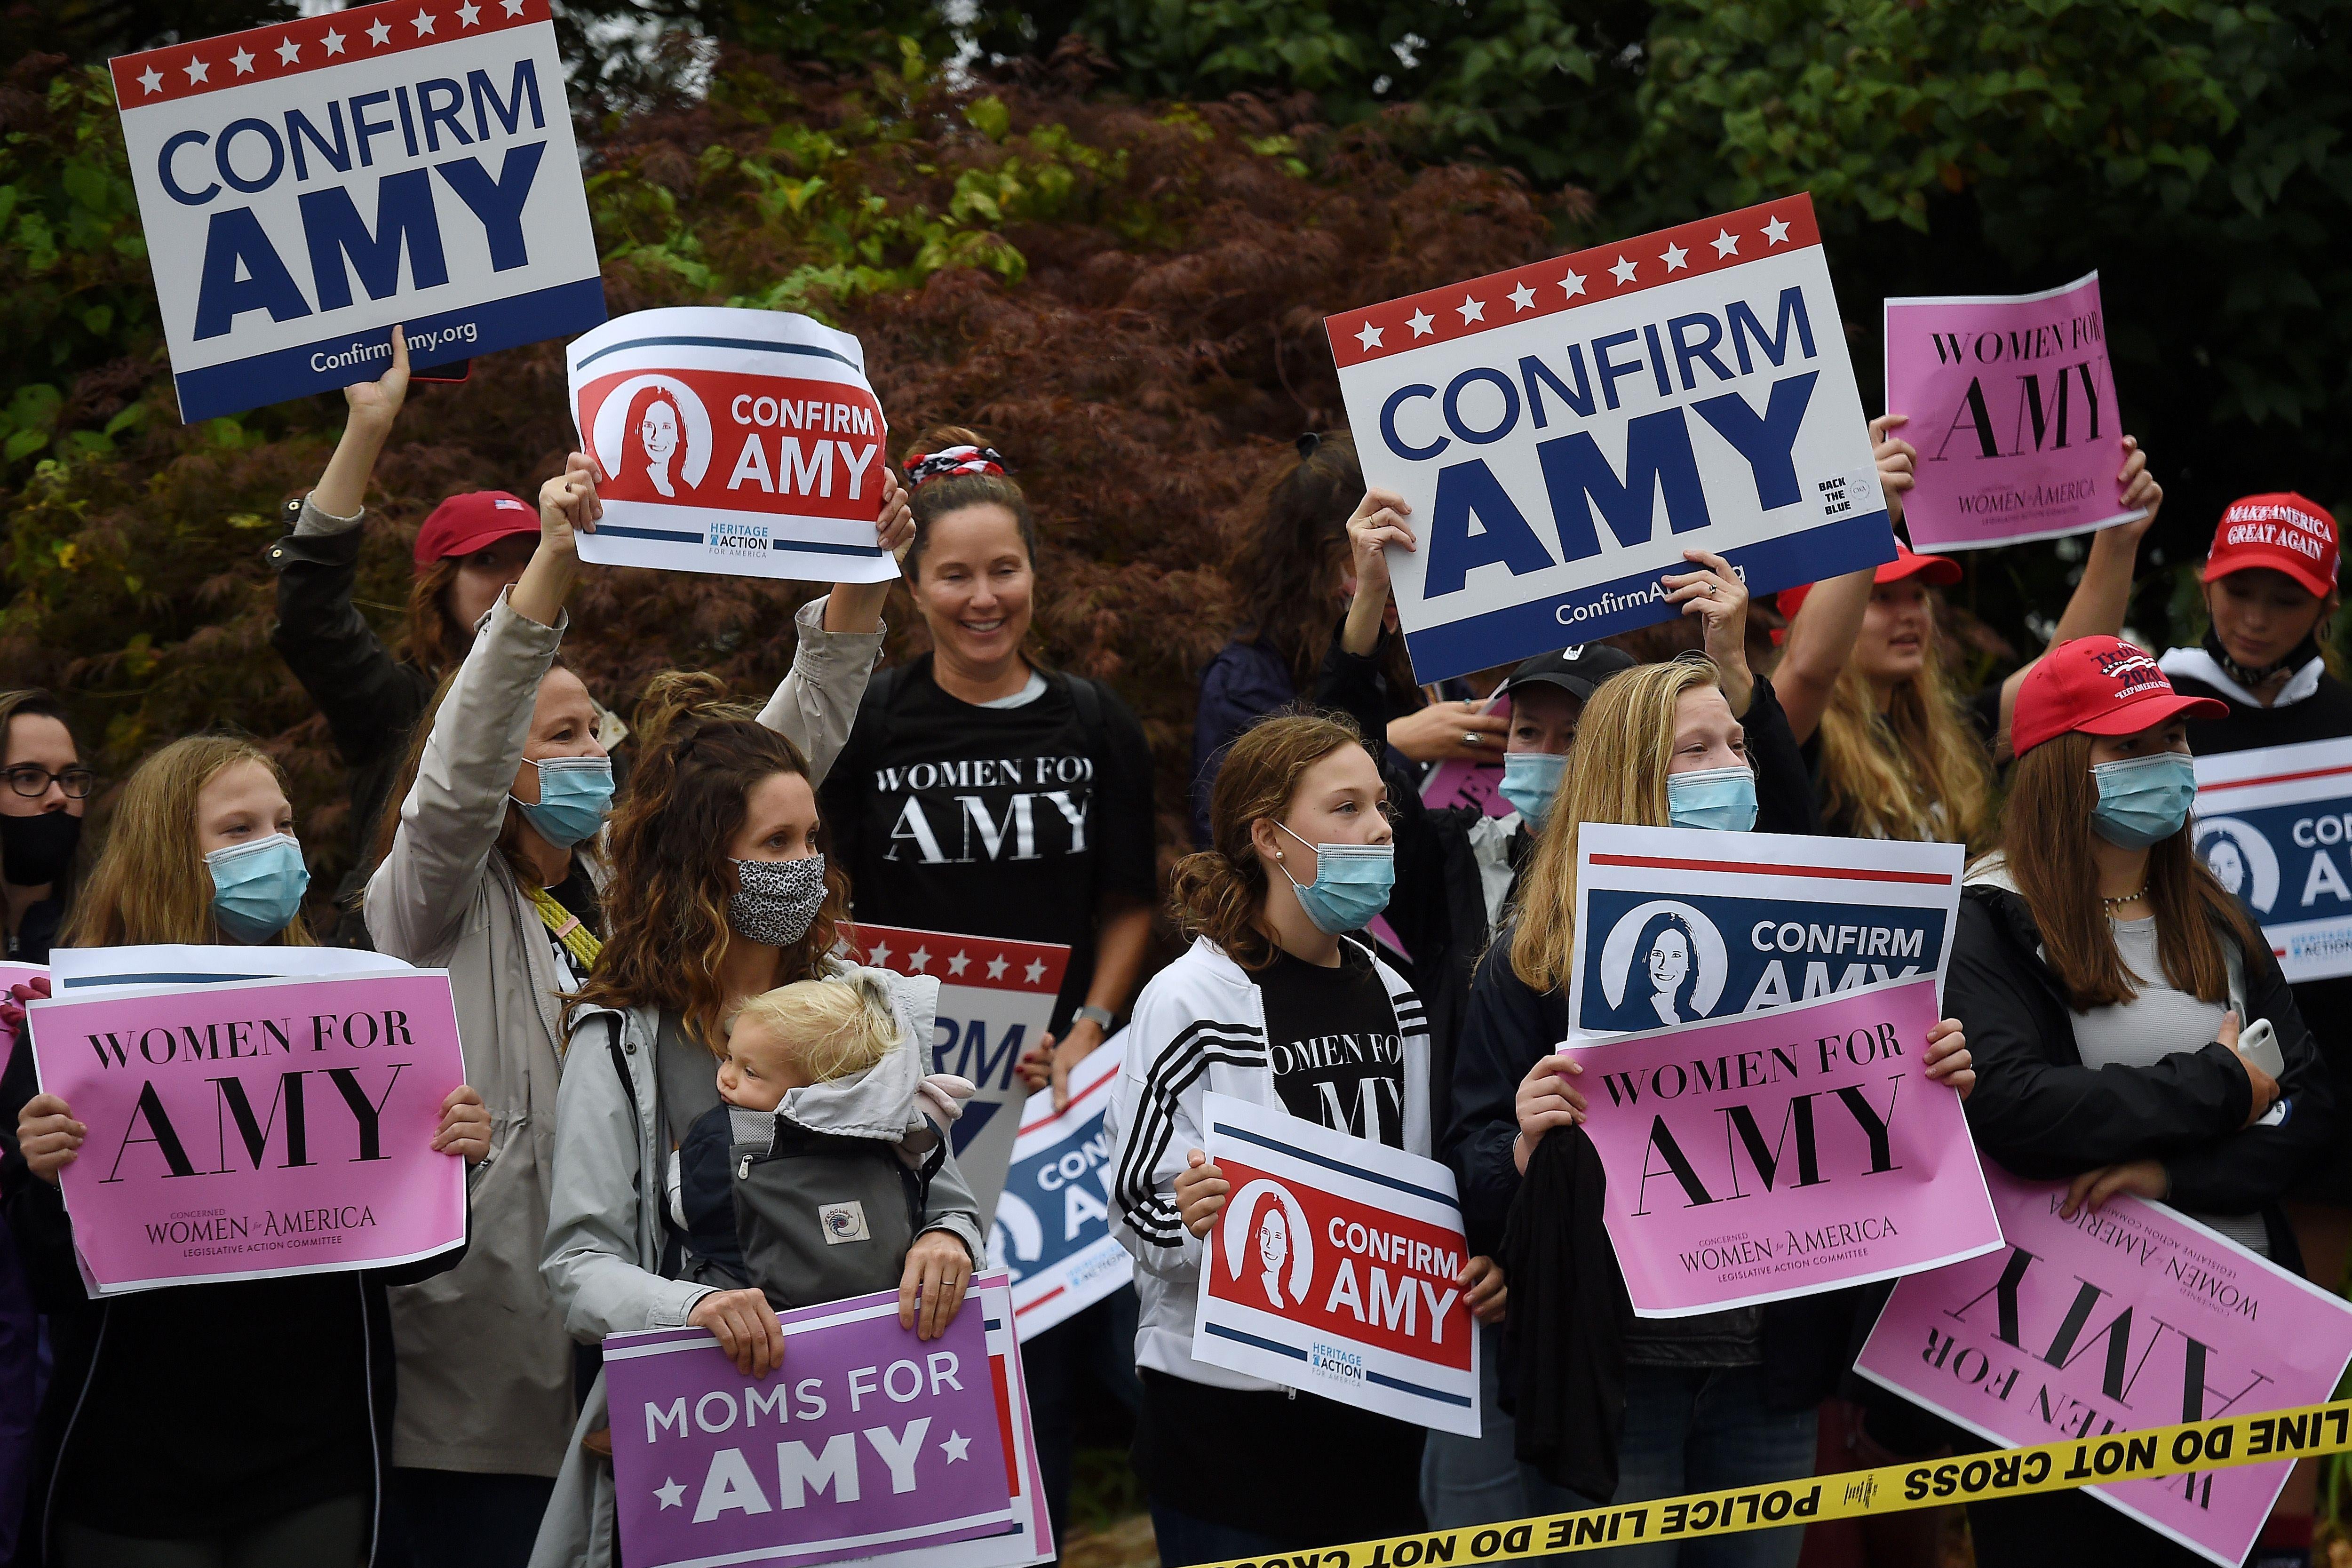 Supporters of President Donald Trump's Supreme Court nominee, Amy Coney Barrett gather in front of the Hart Senate building on the first day of her nomination hearing on October 12, 2020 in Washington, DC. (Photo by Olivier DOULIERY / AFP) (Photo by OLIVIER DOULIERY/AFP via Getty Images)